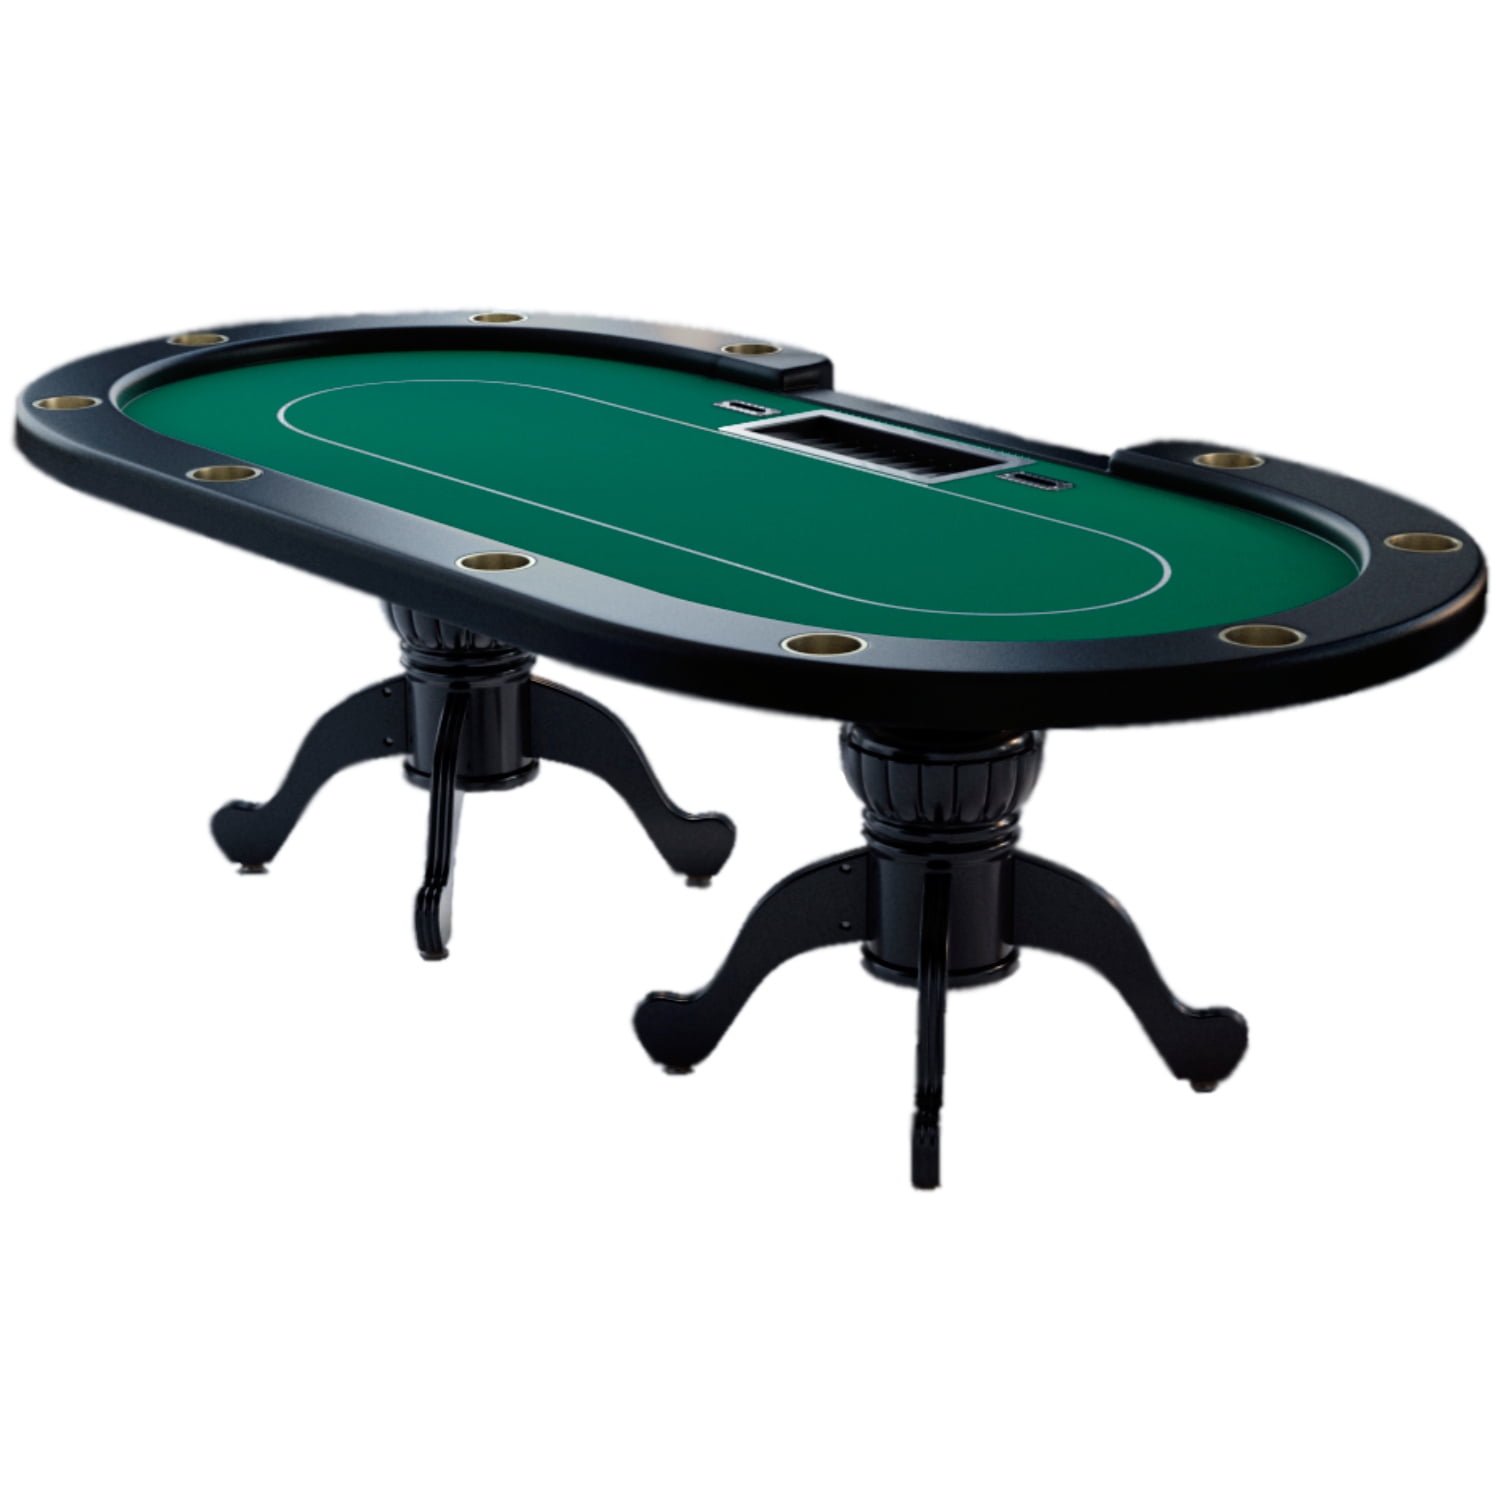 Hathaway Monte Carlo 4 in 1 Multi Game Casino Table Blackjack Roulette Table New 